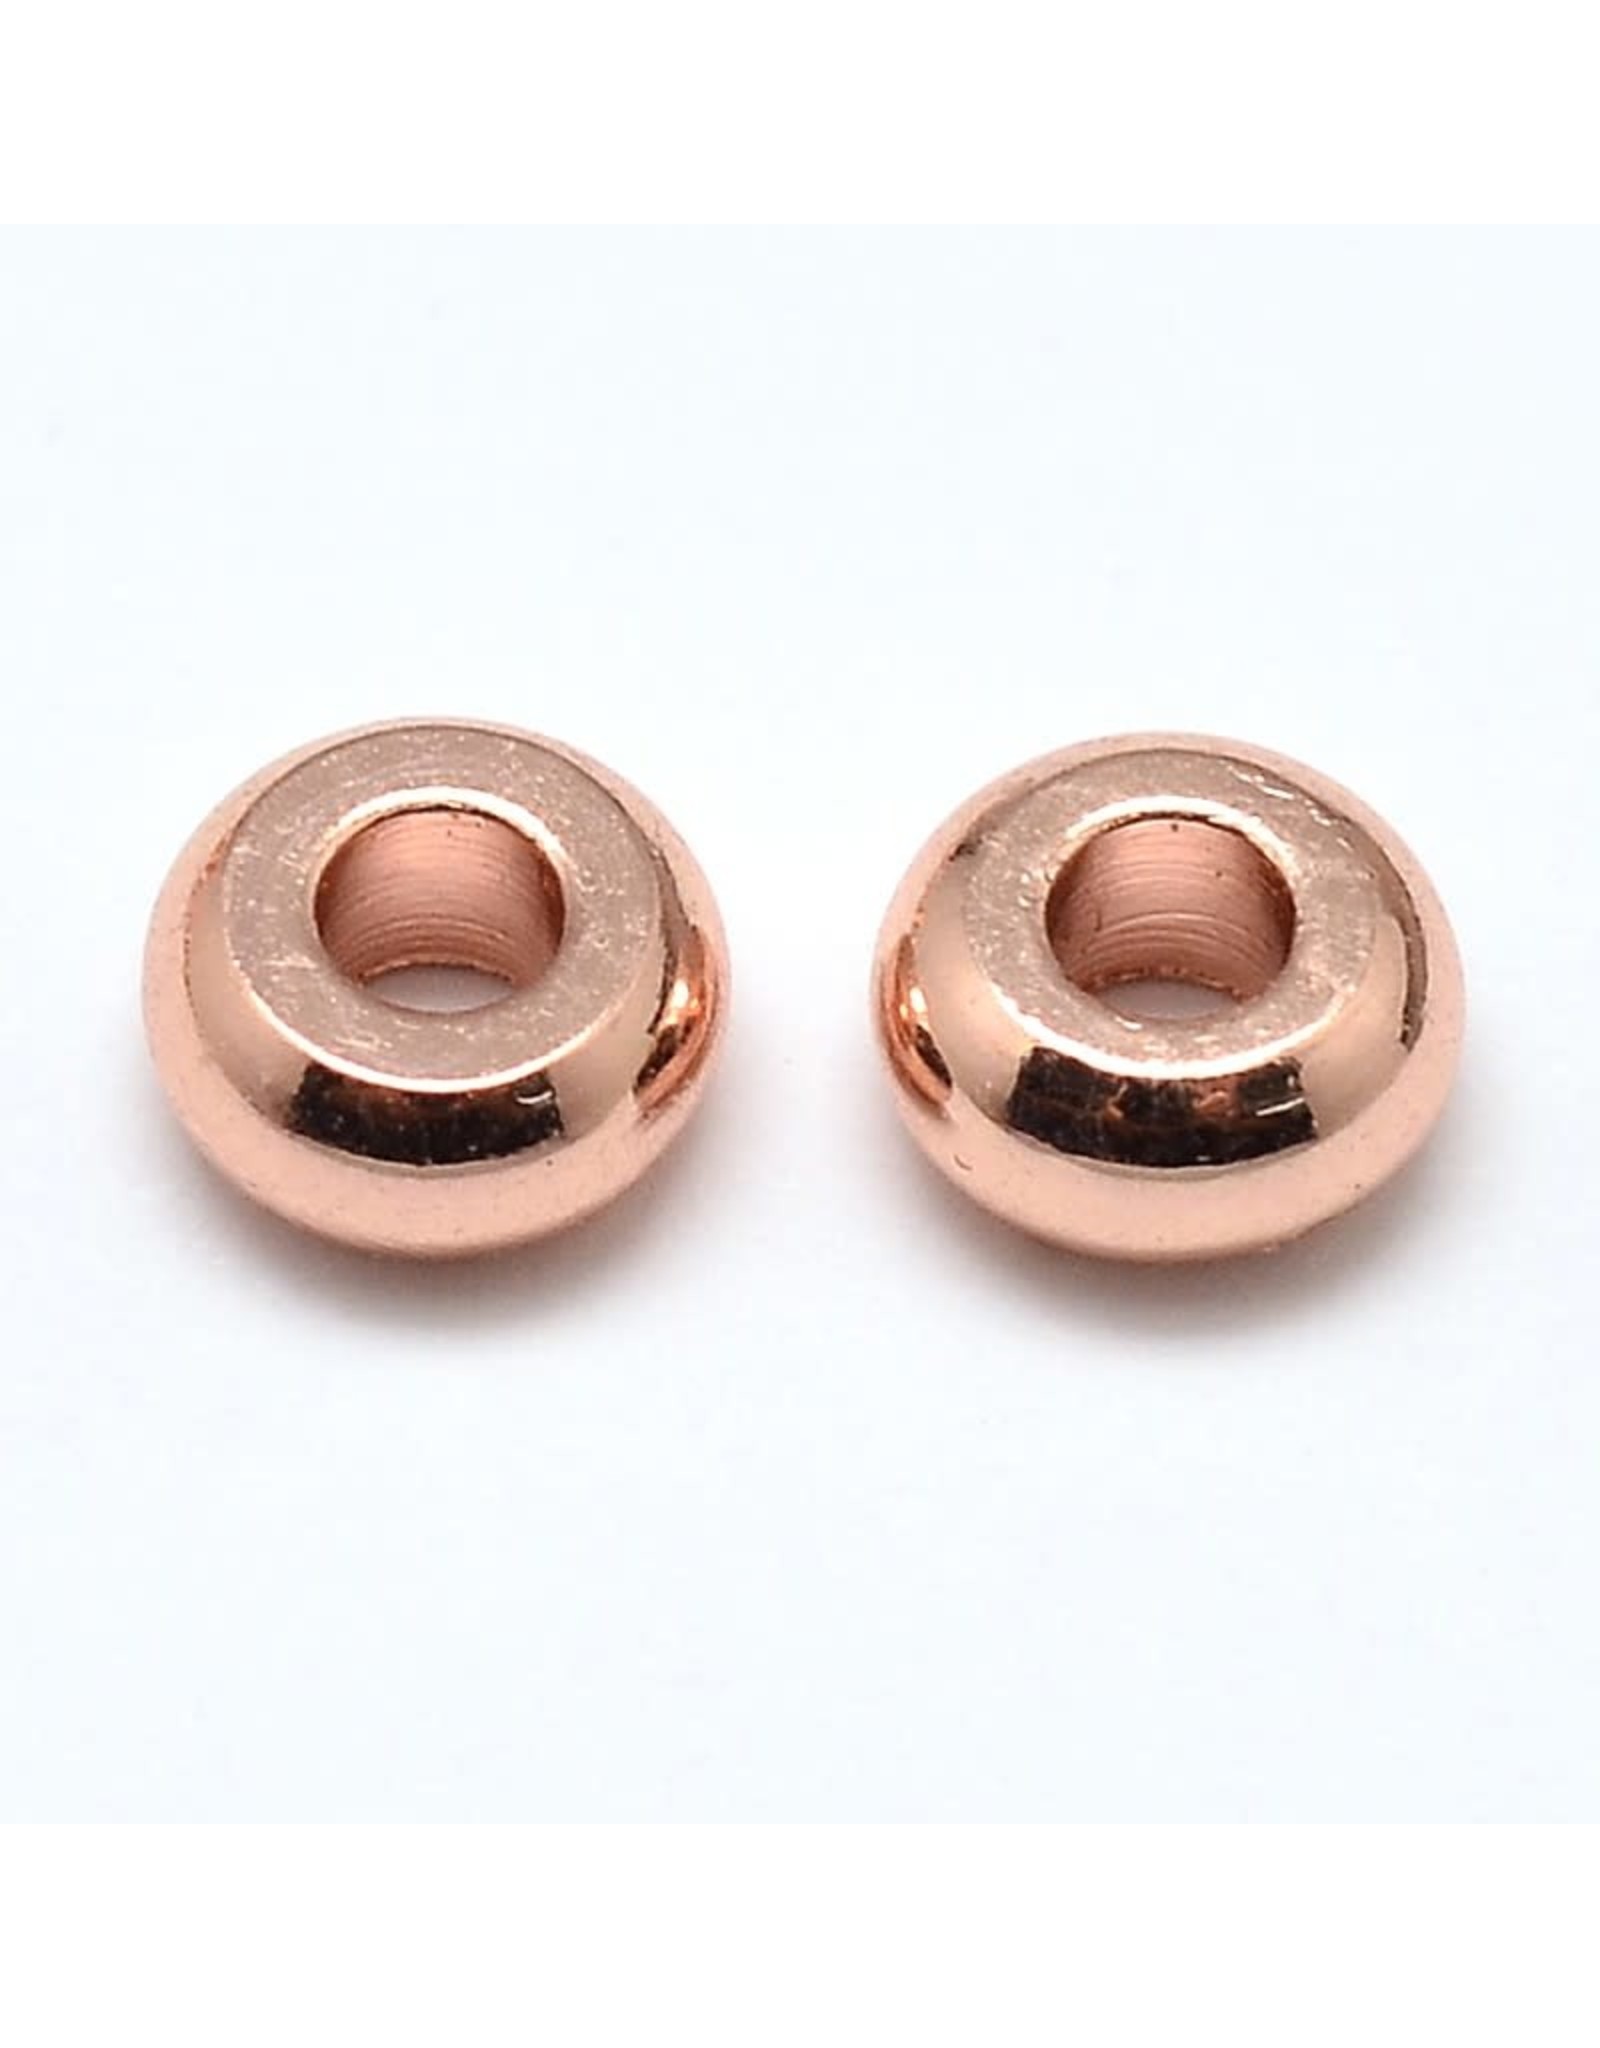 Spacer Bead 4x1.5mm Rose Gold x100